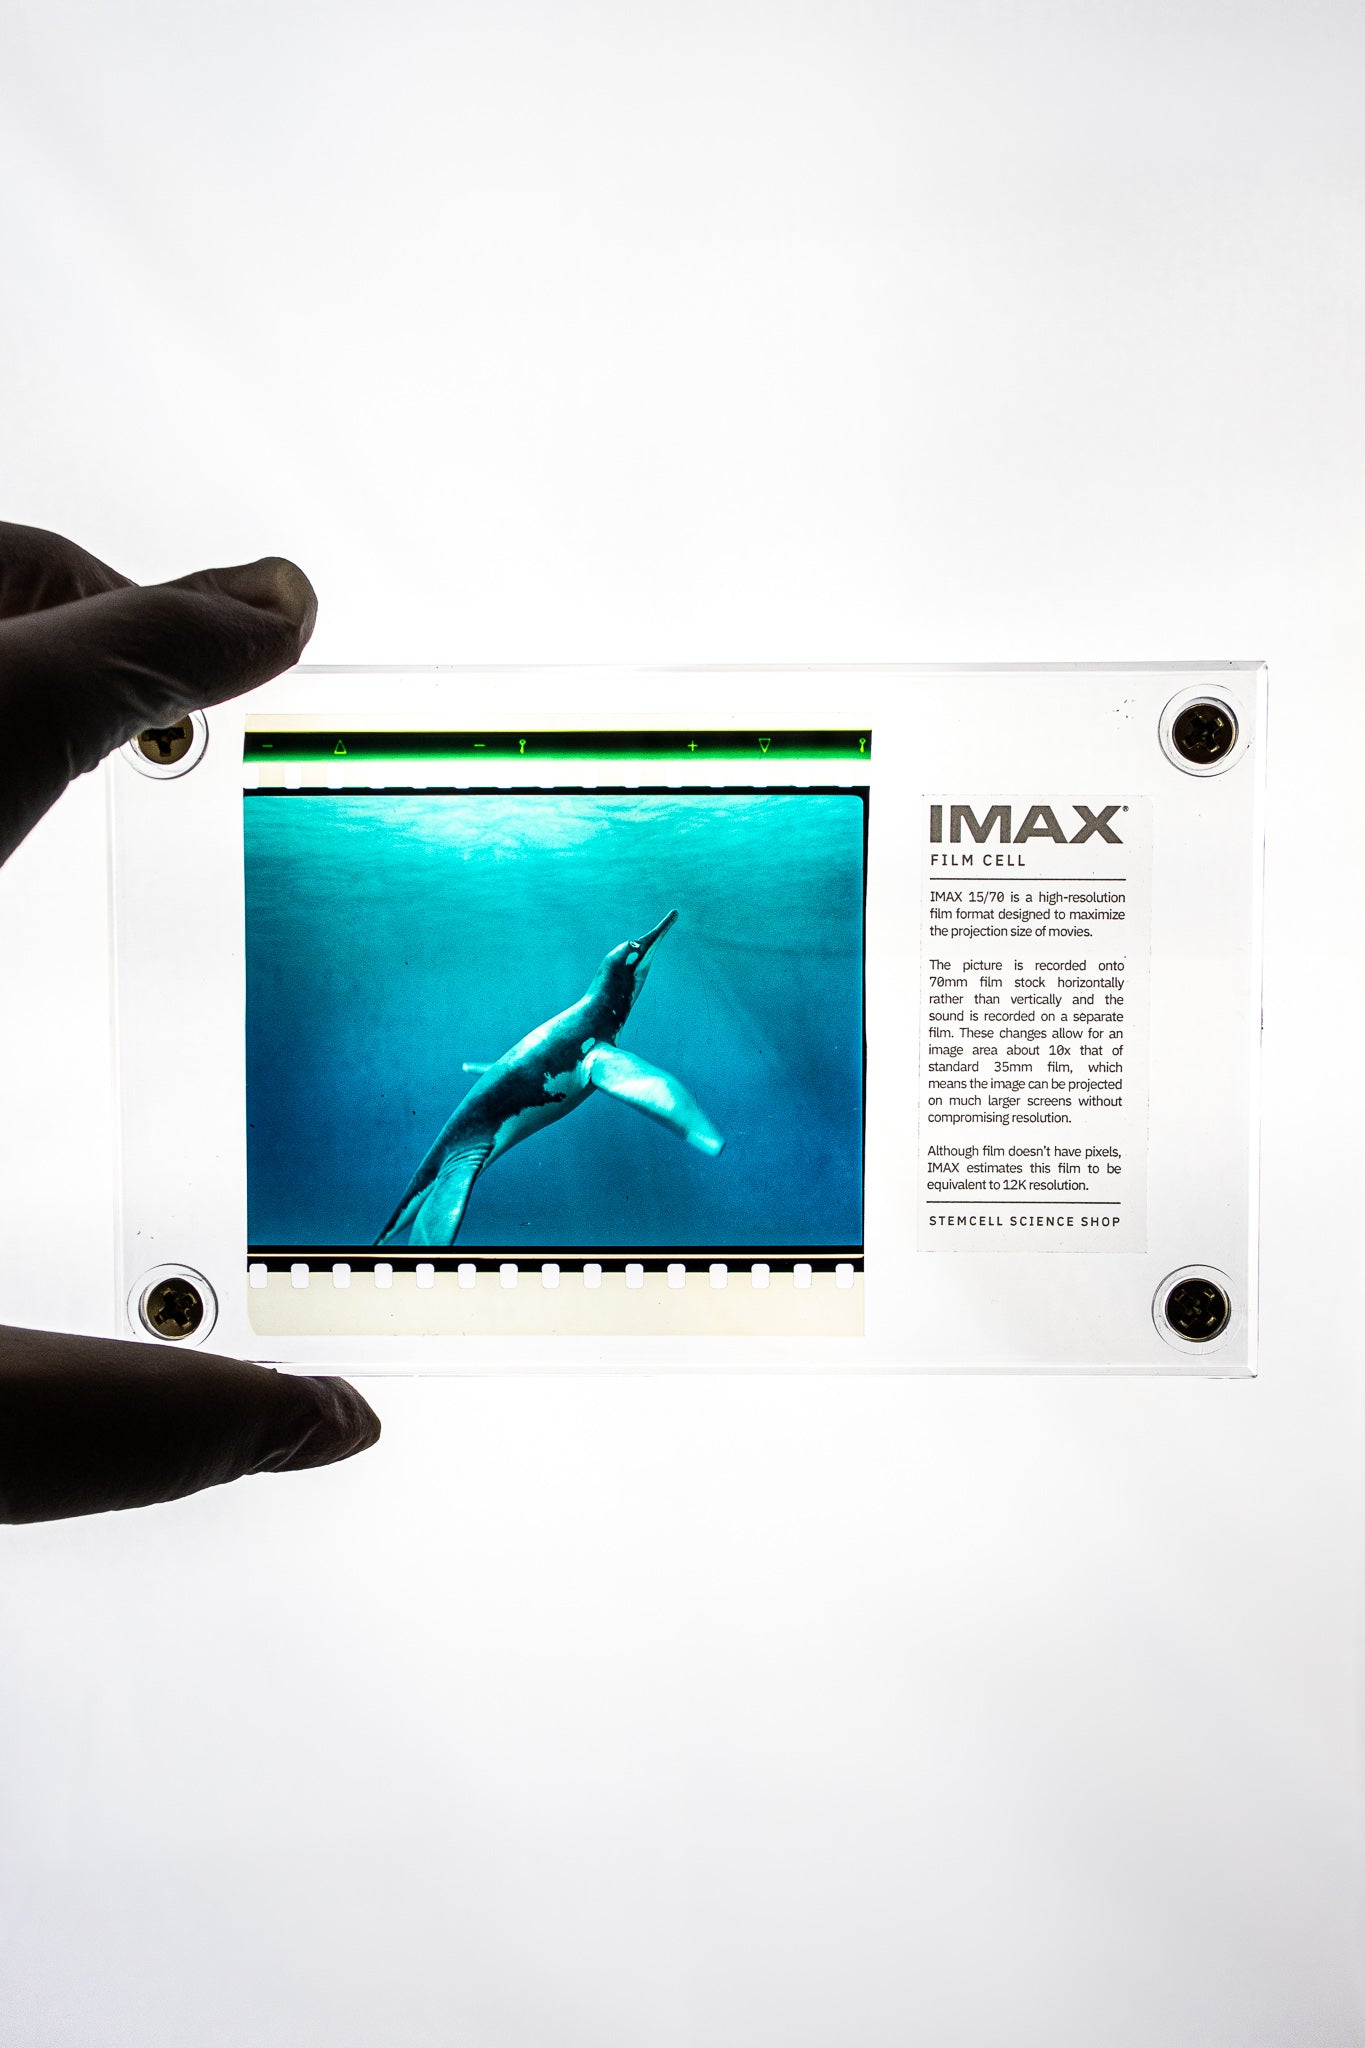 IMAX Film Cell